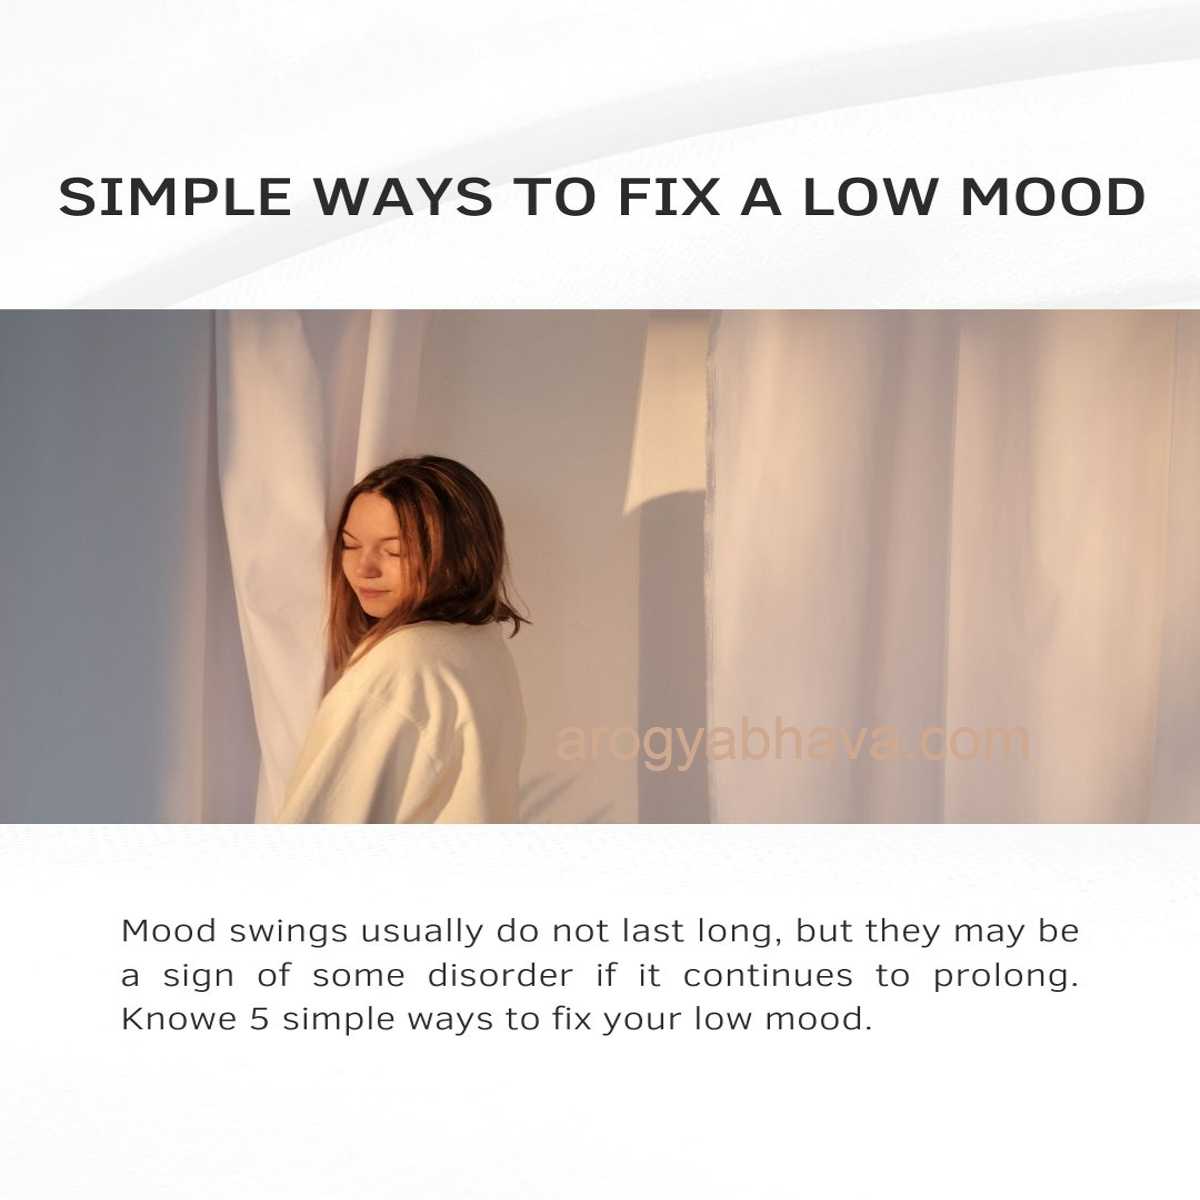 Mastering Your Moods - How To Fix A Low Mood